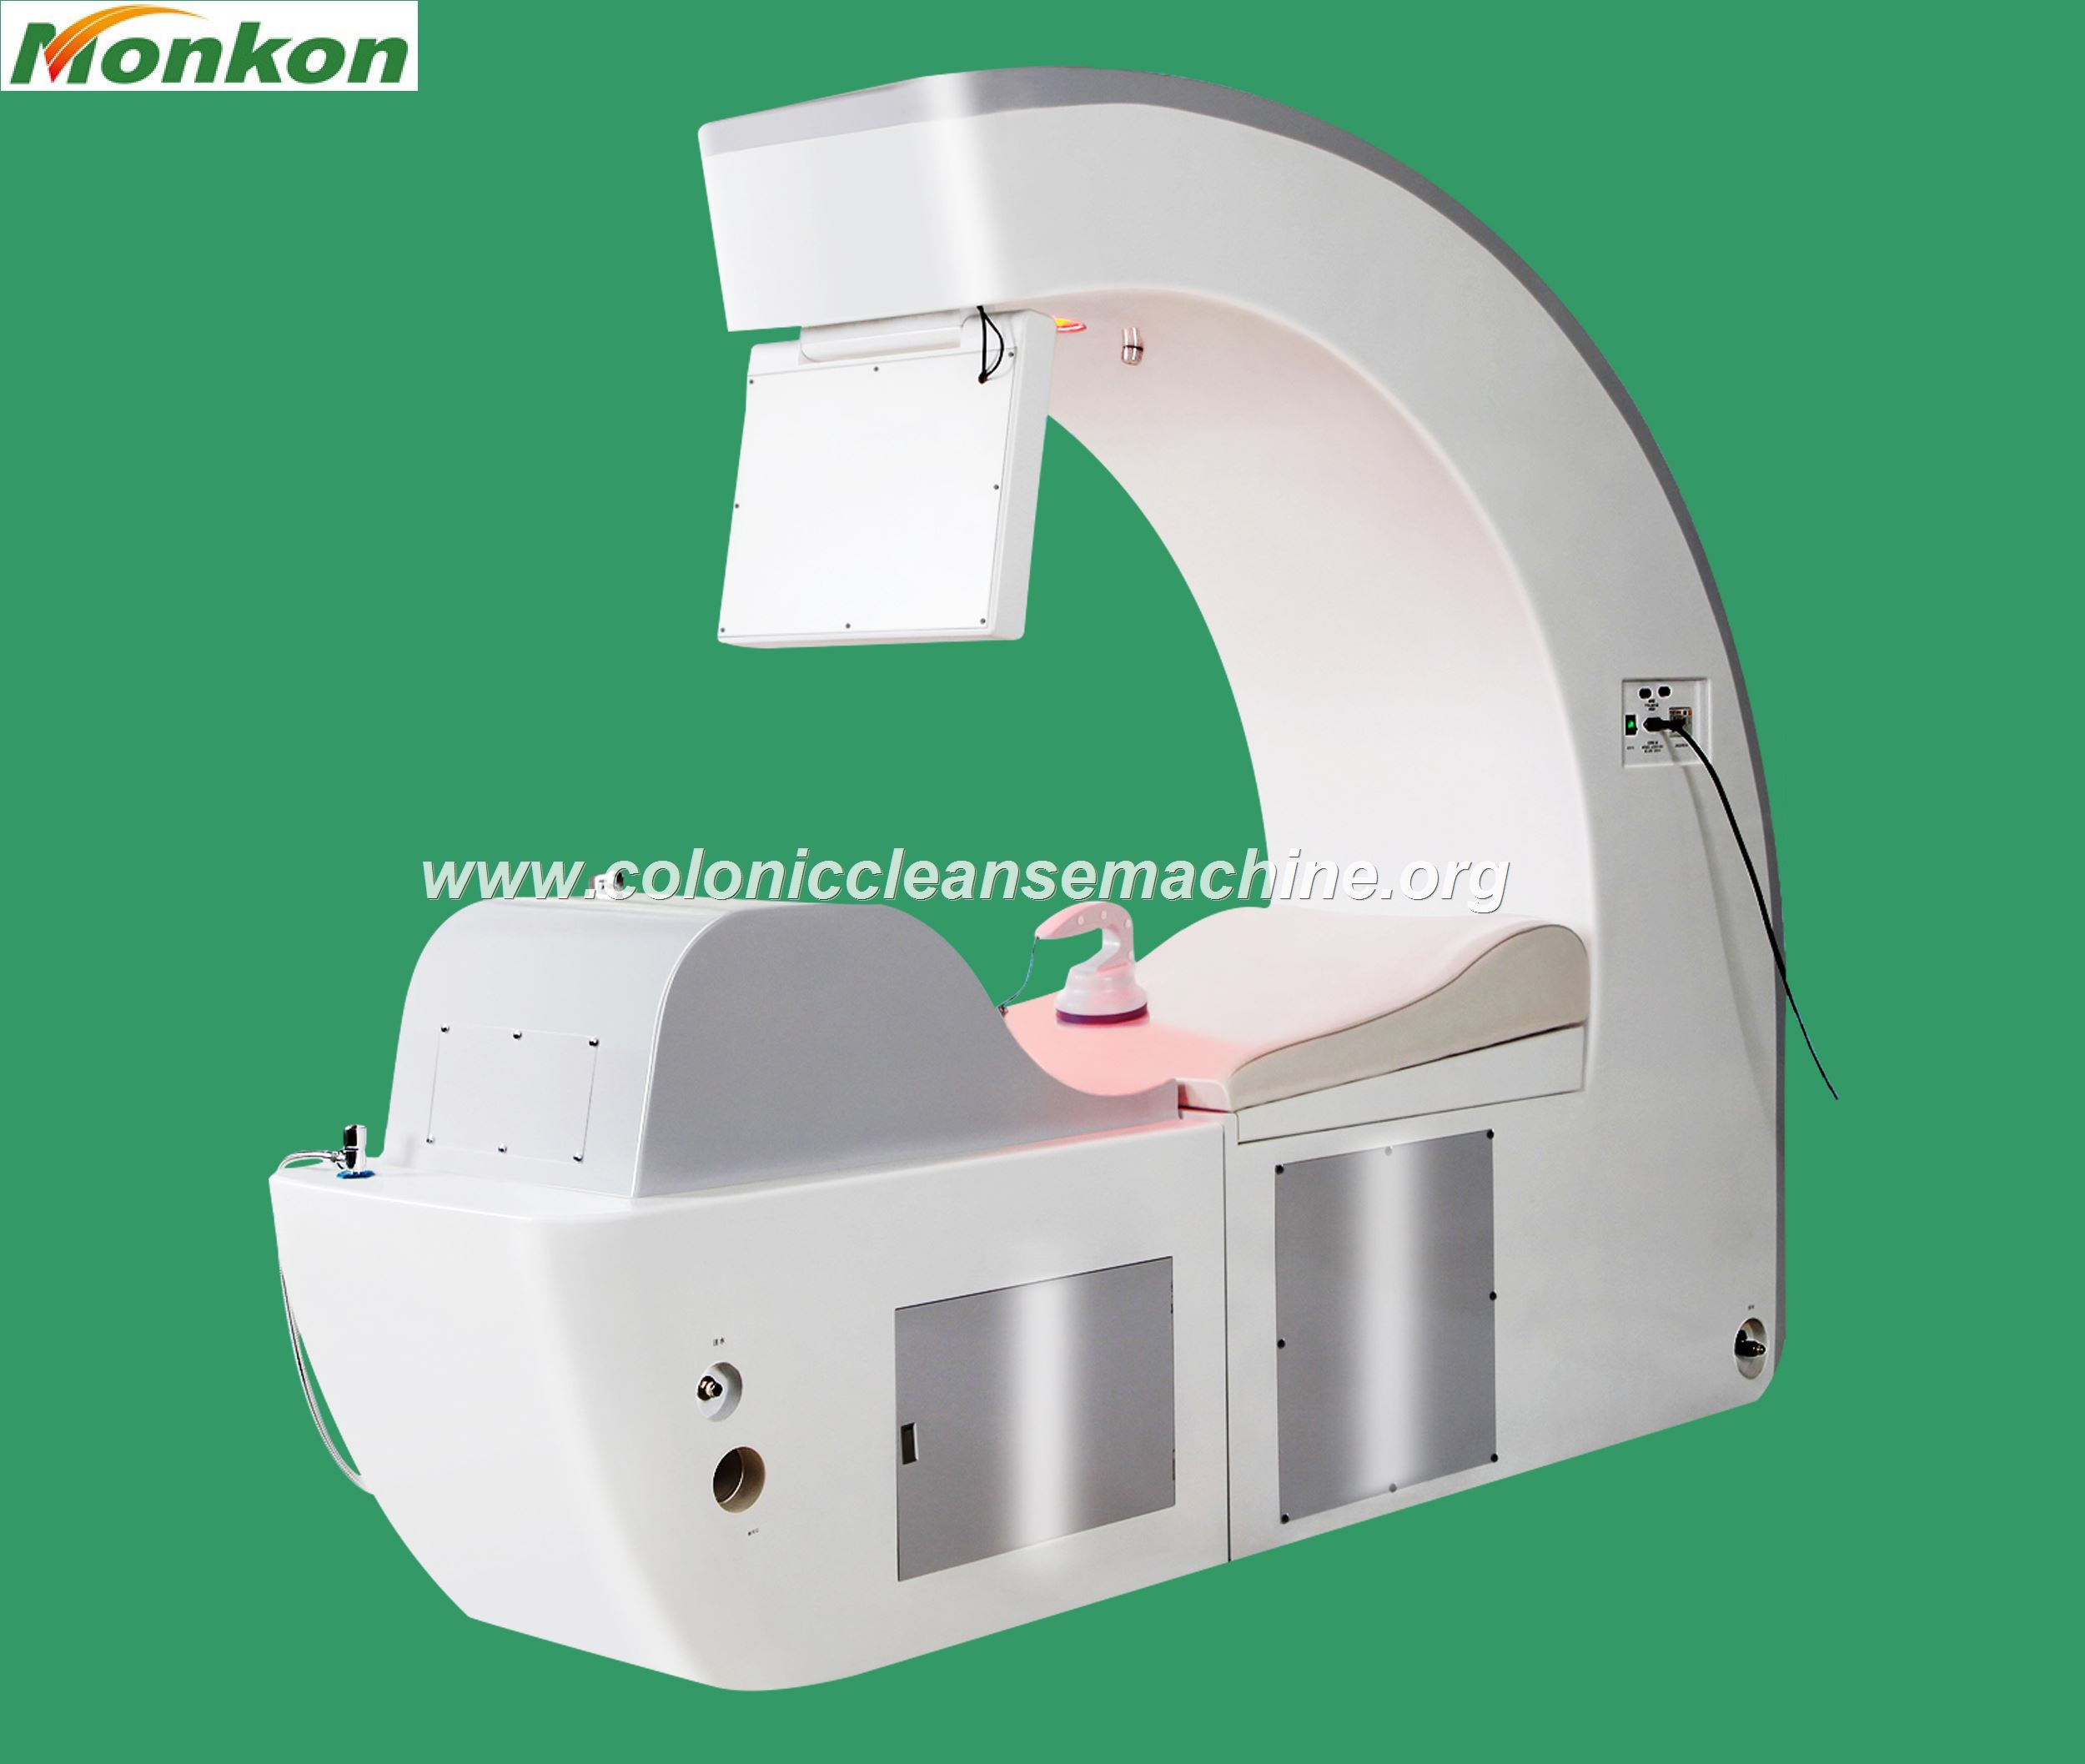 MAIKONG Colonet Colonic Machine: Transforming Colon Hydrotherapy